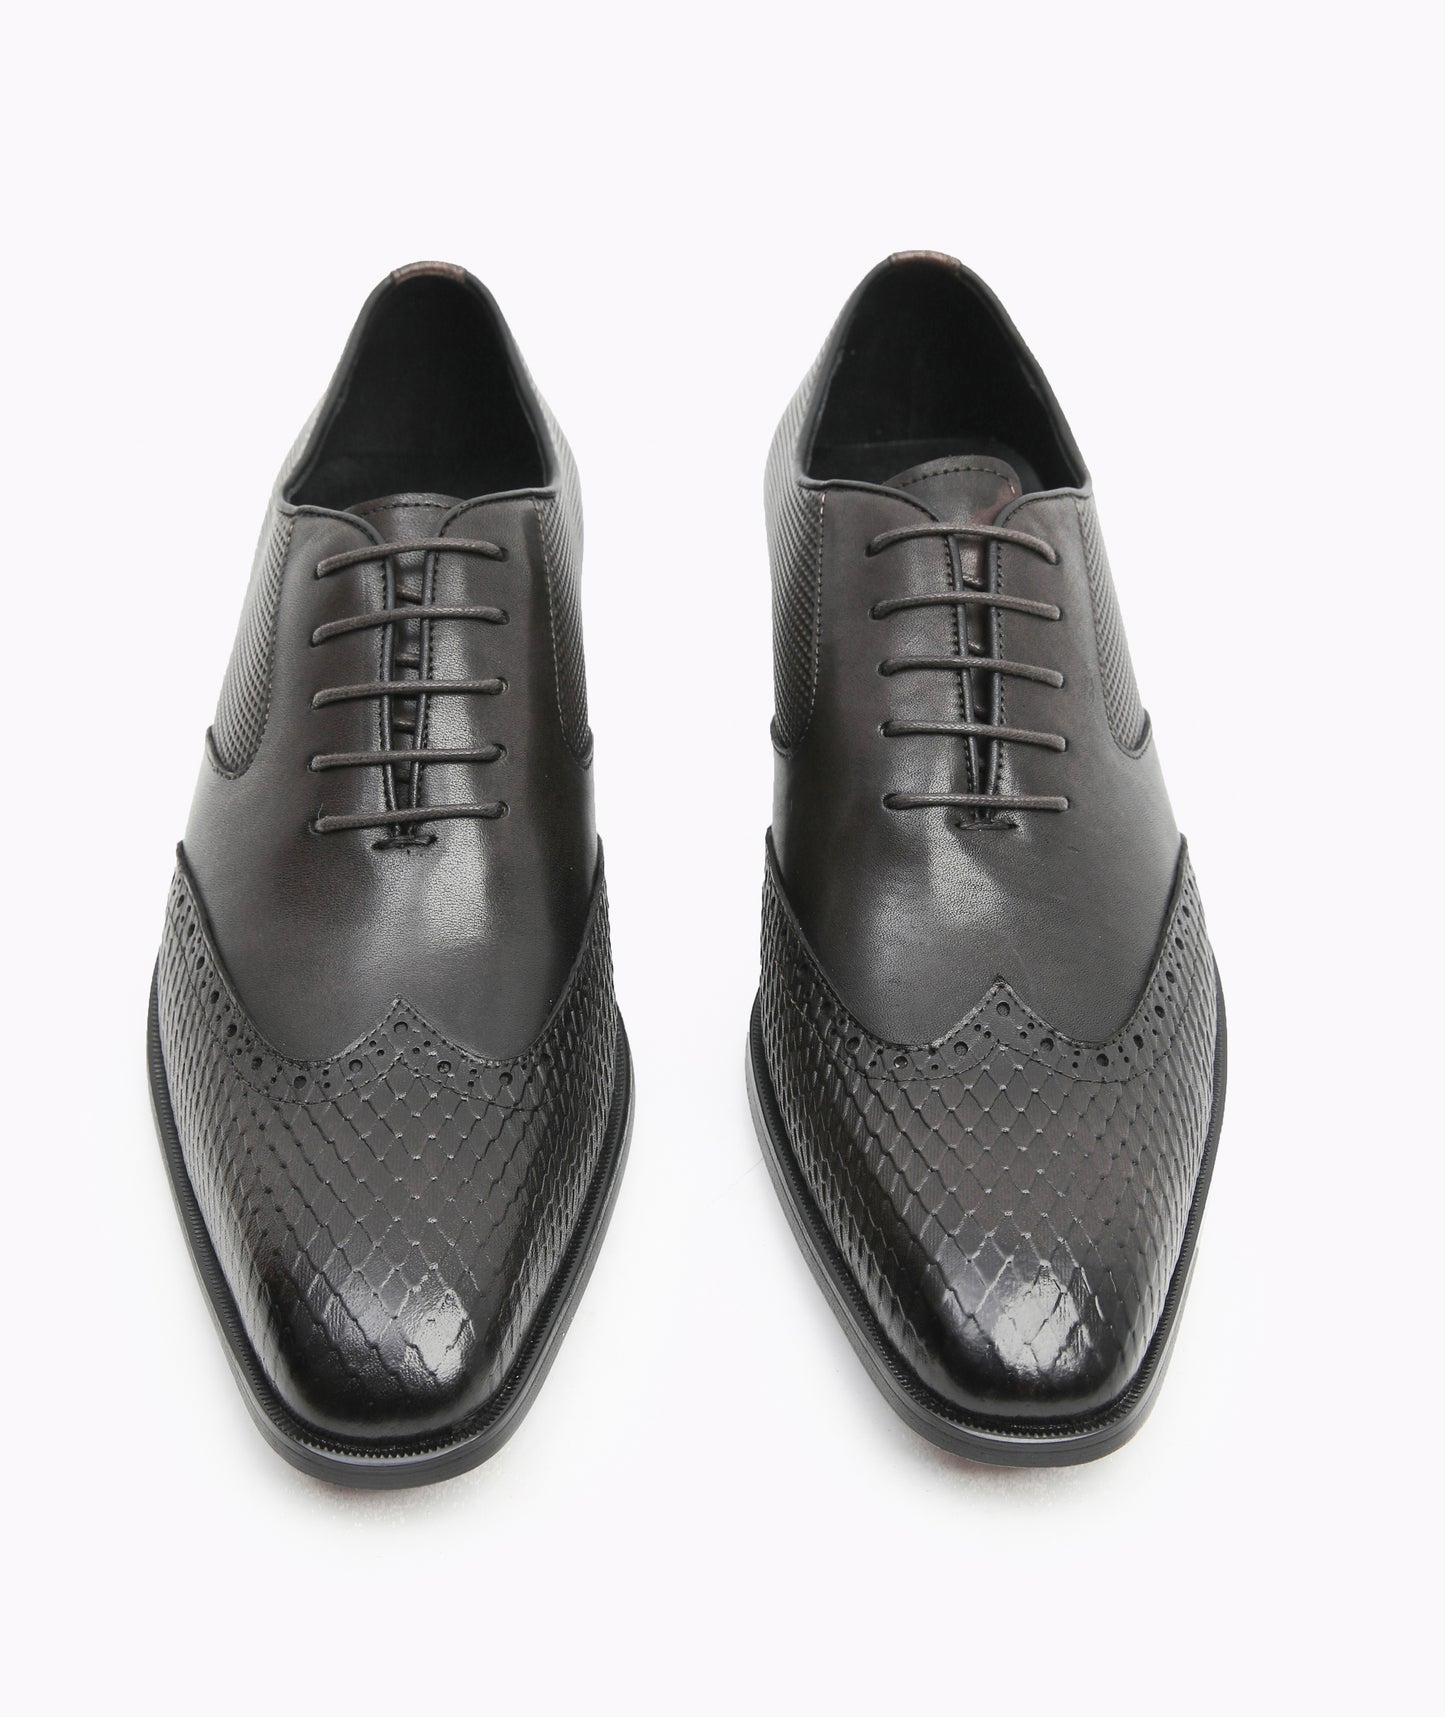 Oxford Textured Shoes